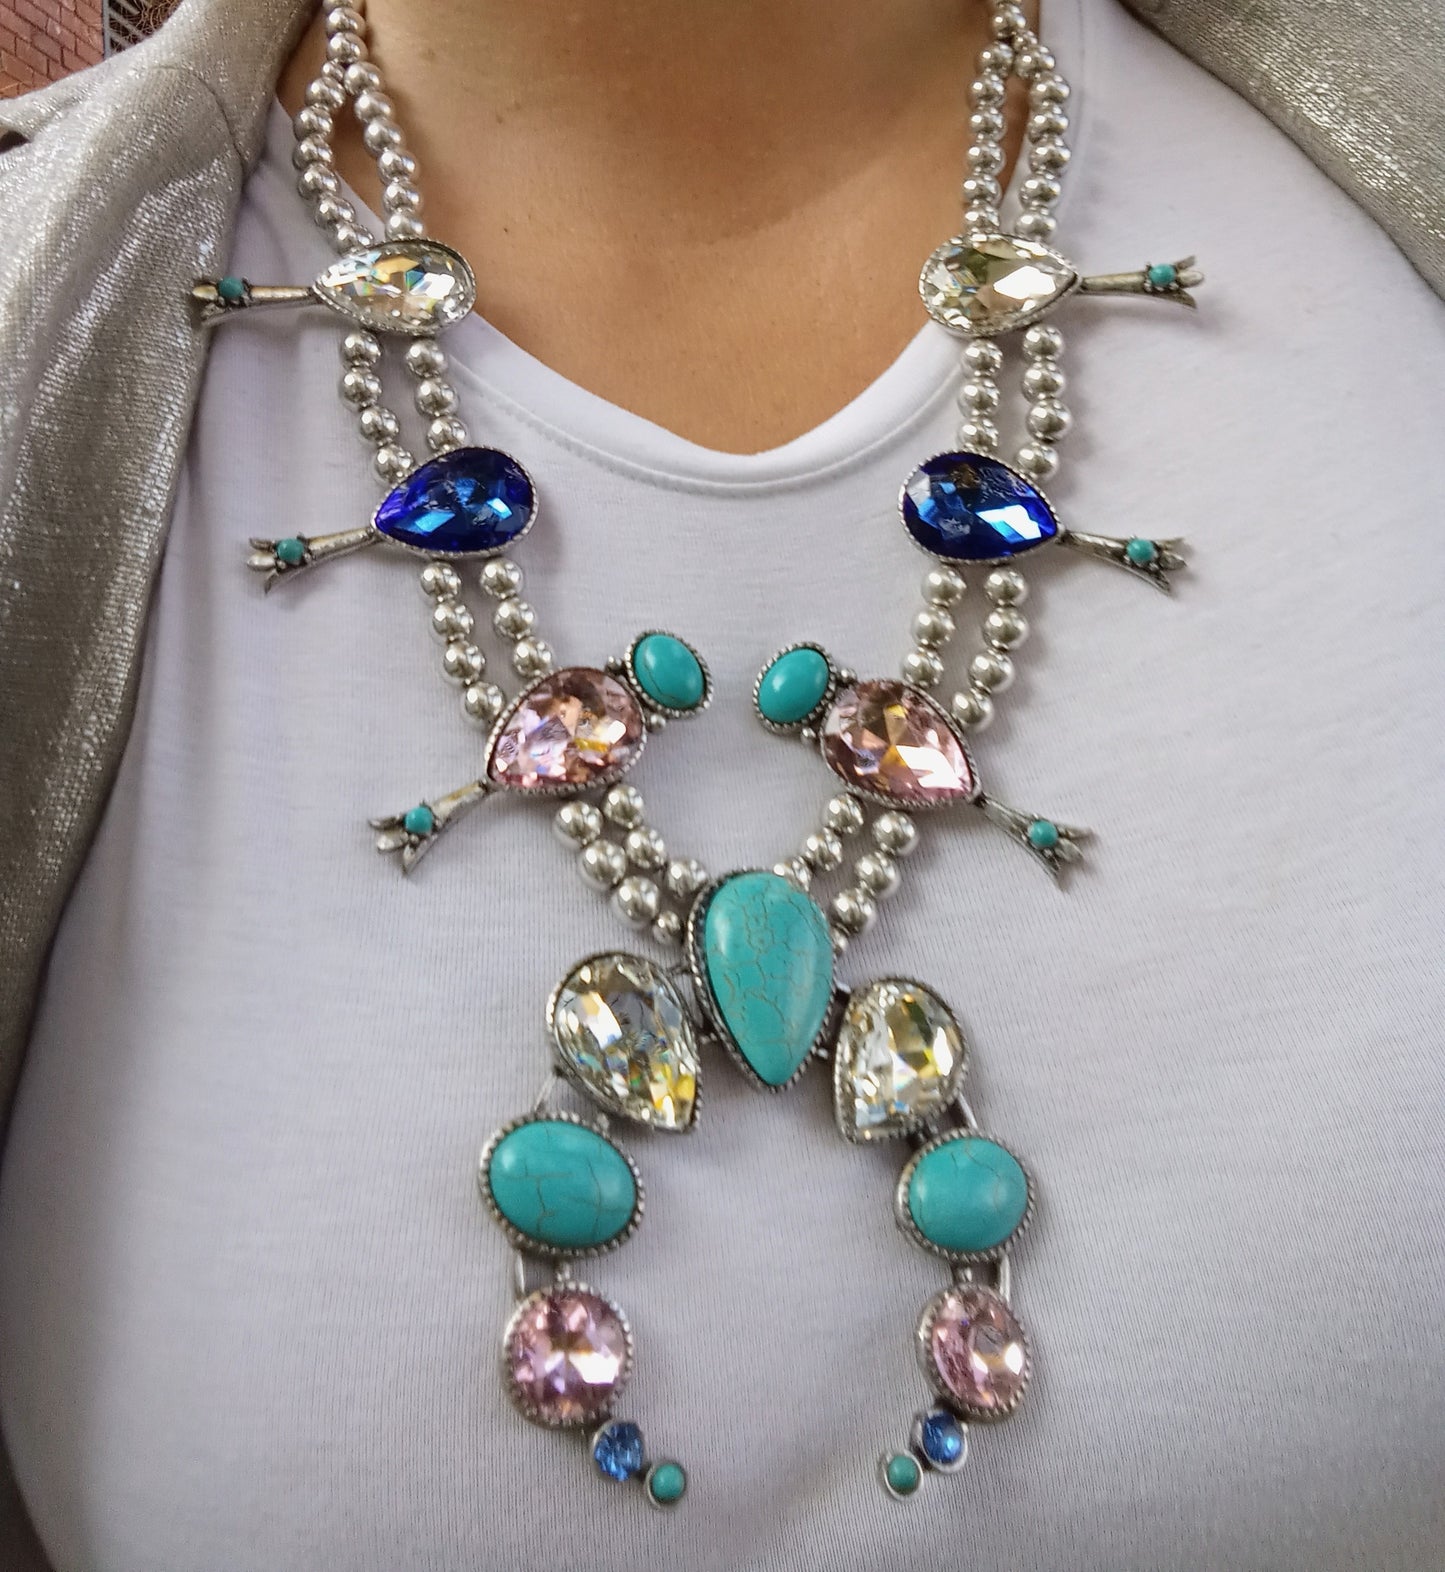 Faux Squash Blossom Necklace with Turquoise and Colored Gemstone blossoms